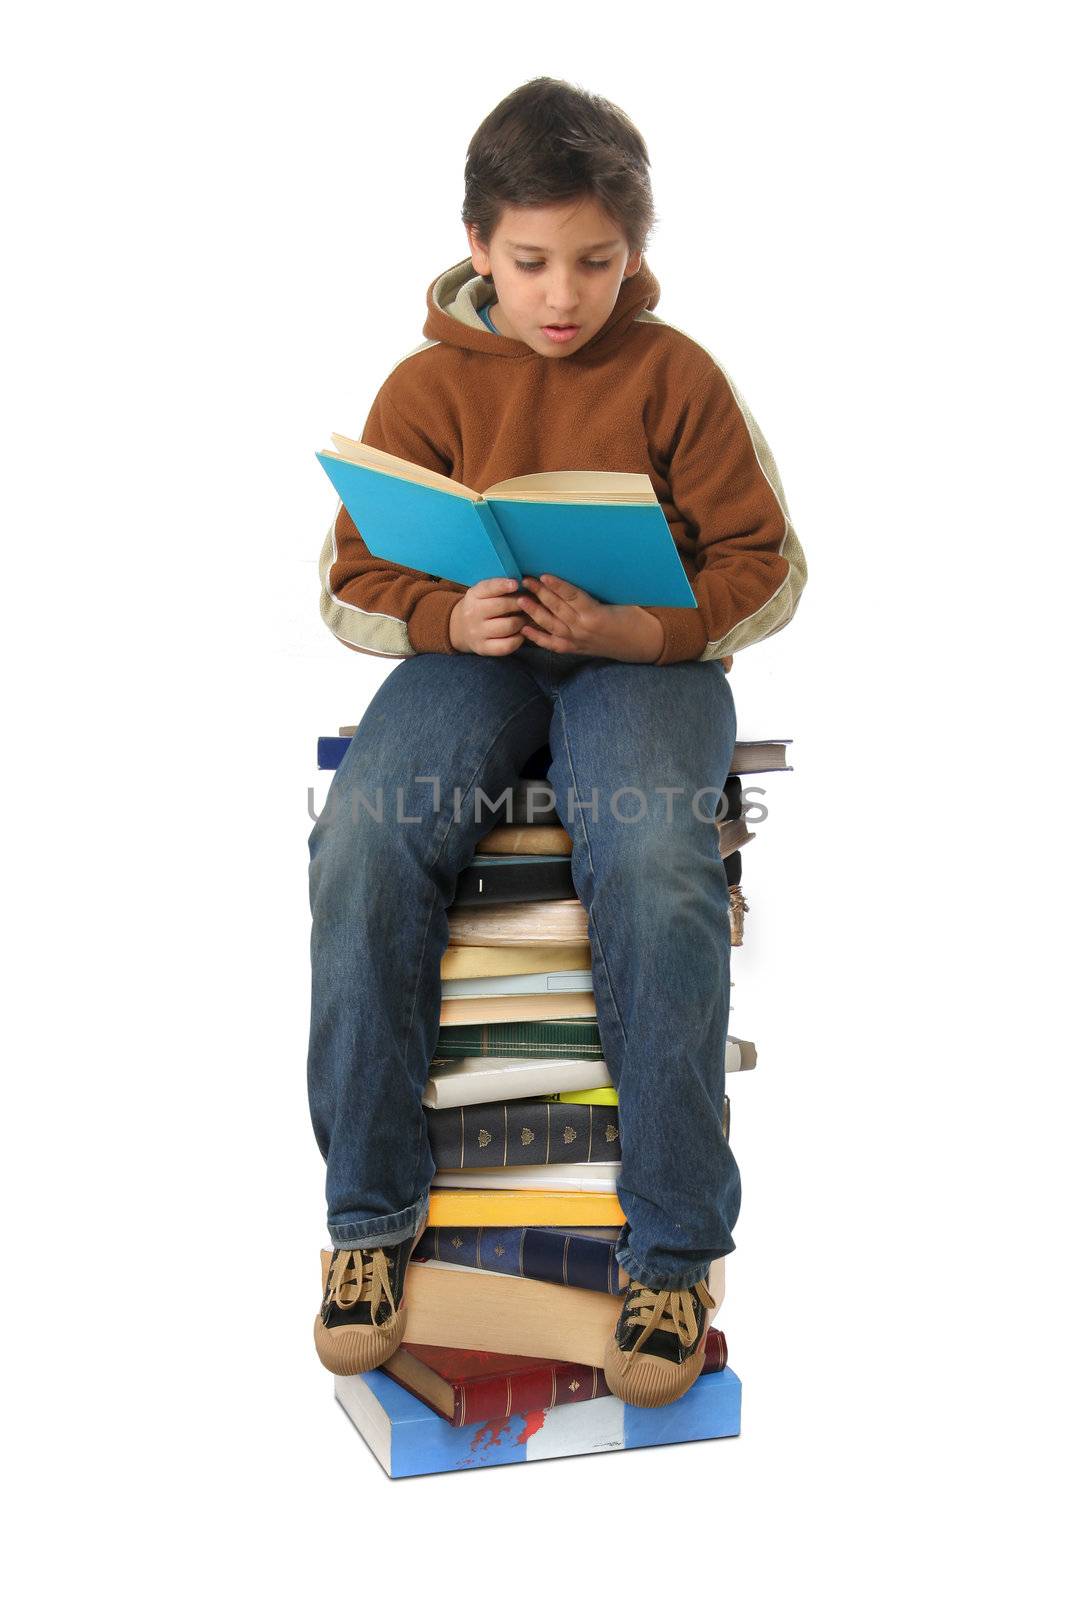 Student sitting on a pile of books by Erdosain